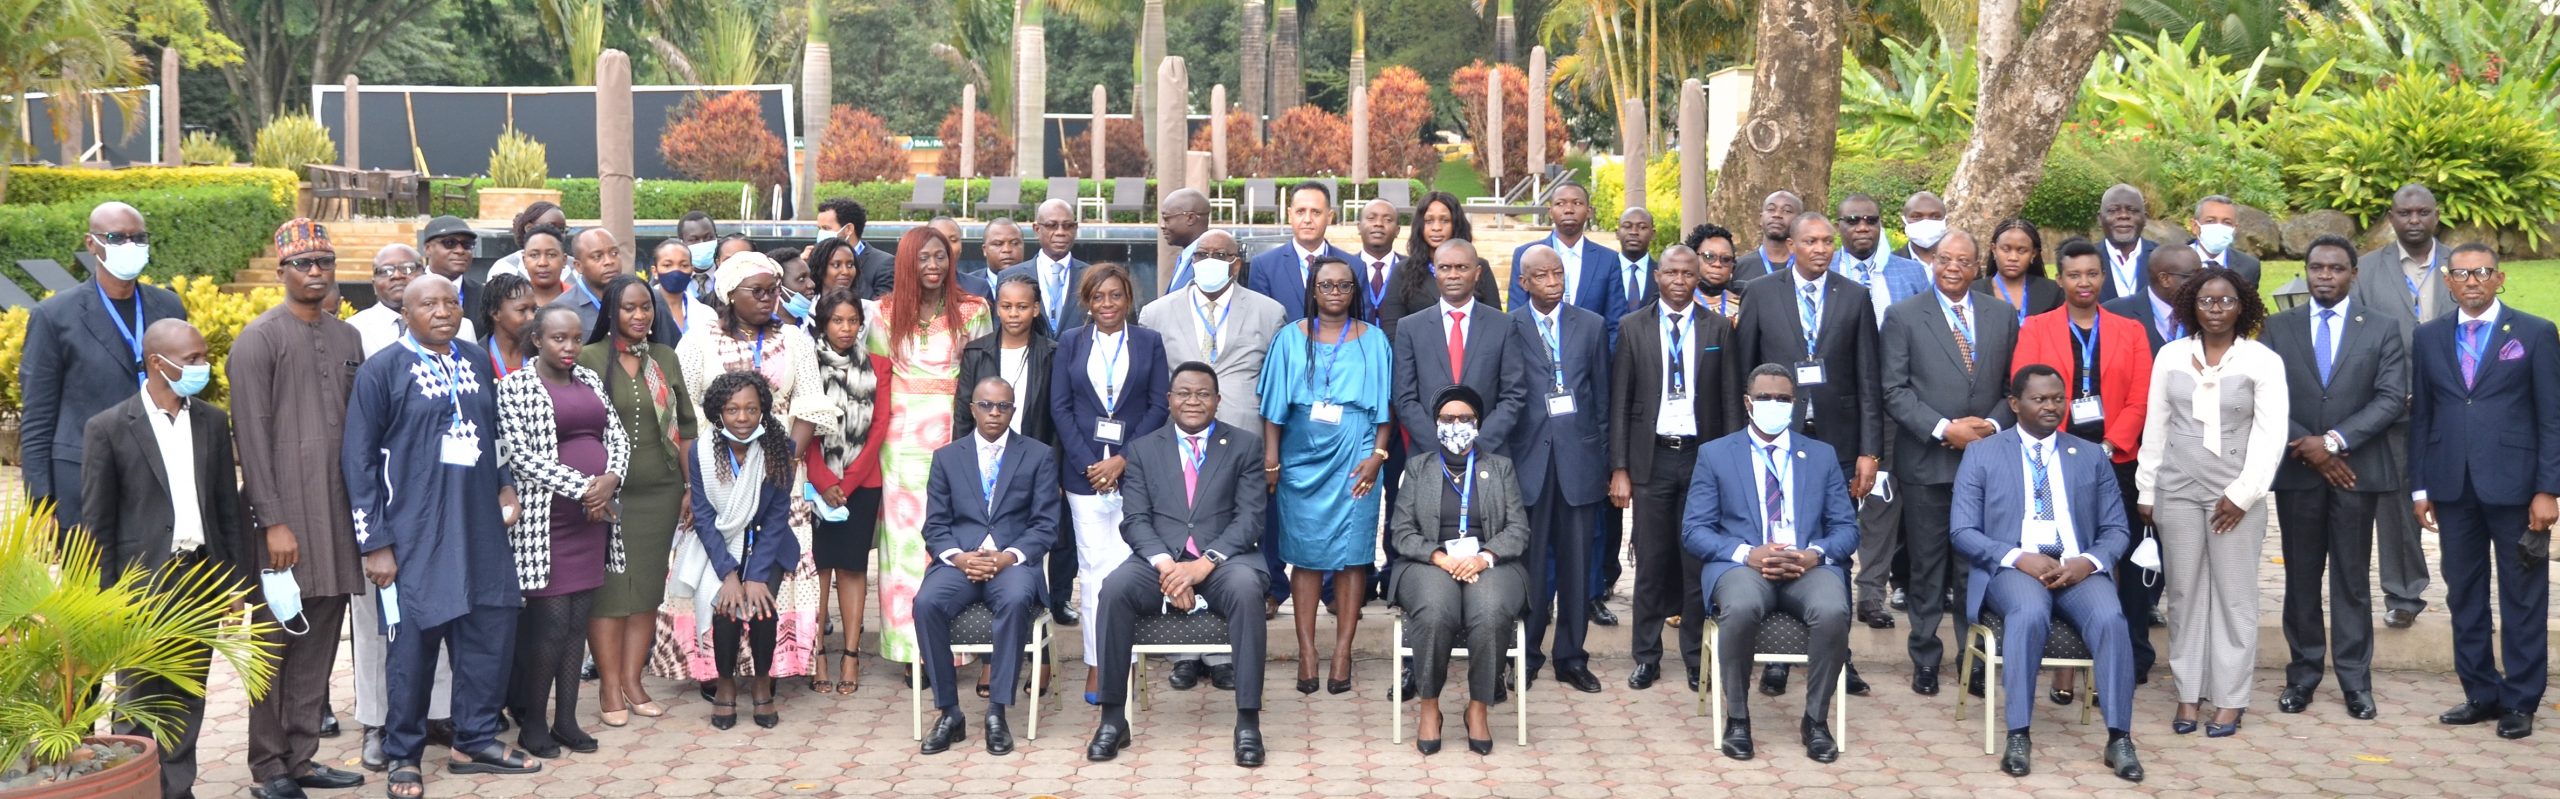 40 LAWYERS ATTEND AFRICAN COURT TRAINING IN ARUSHA